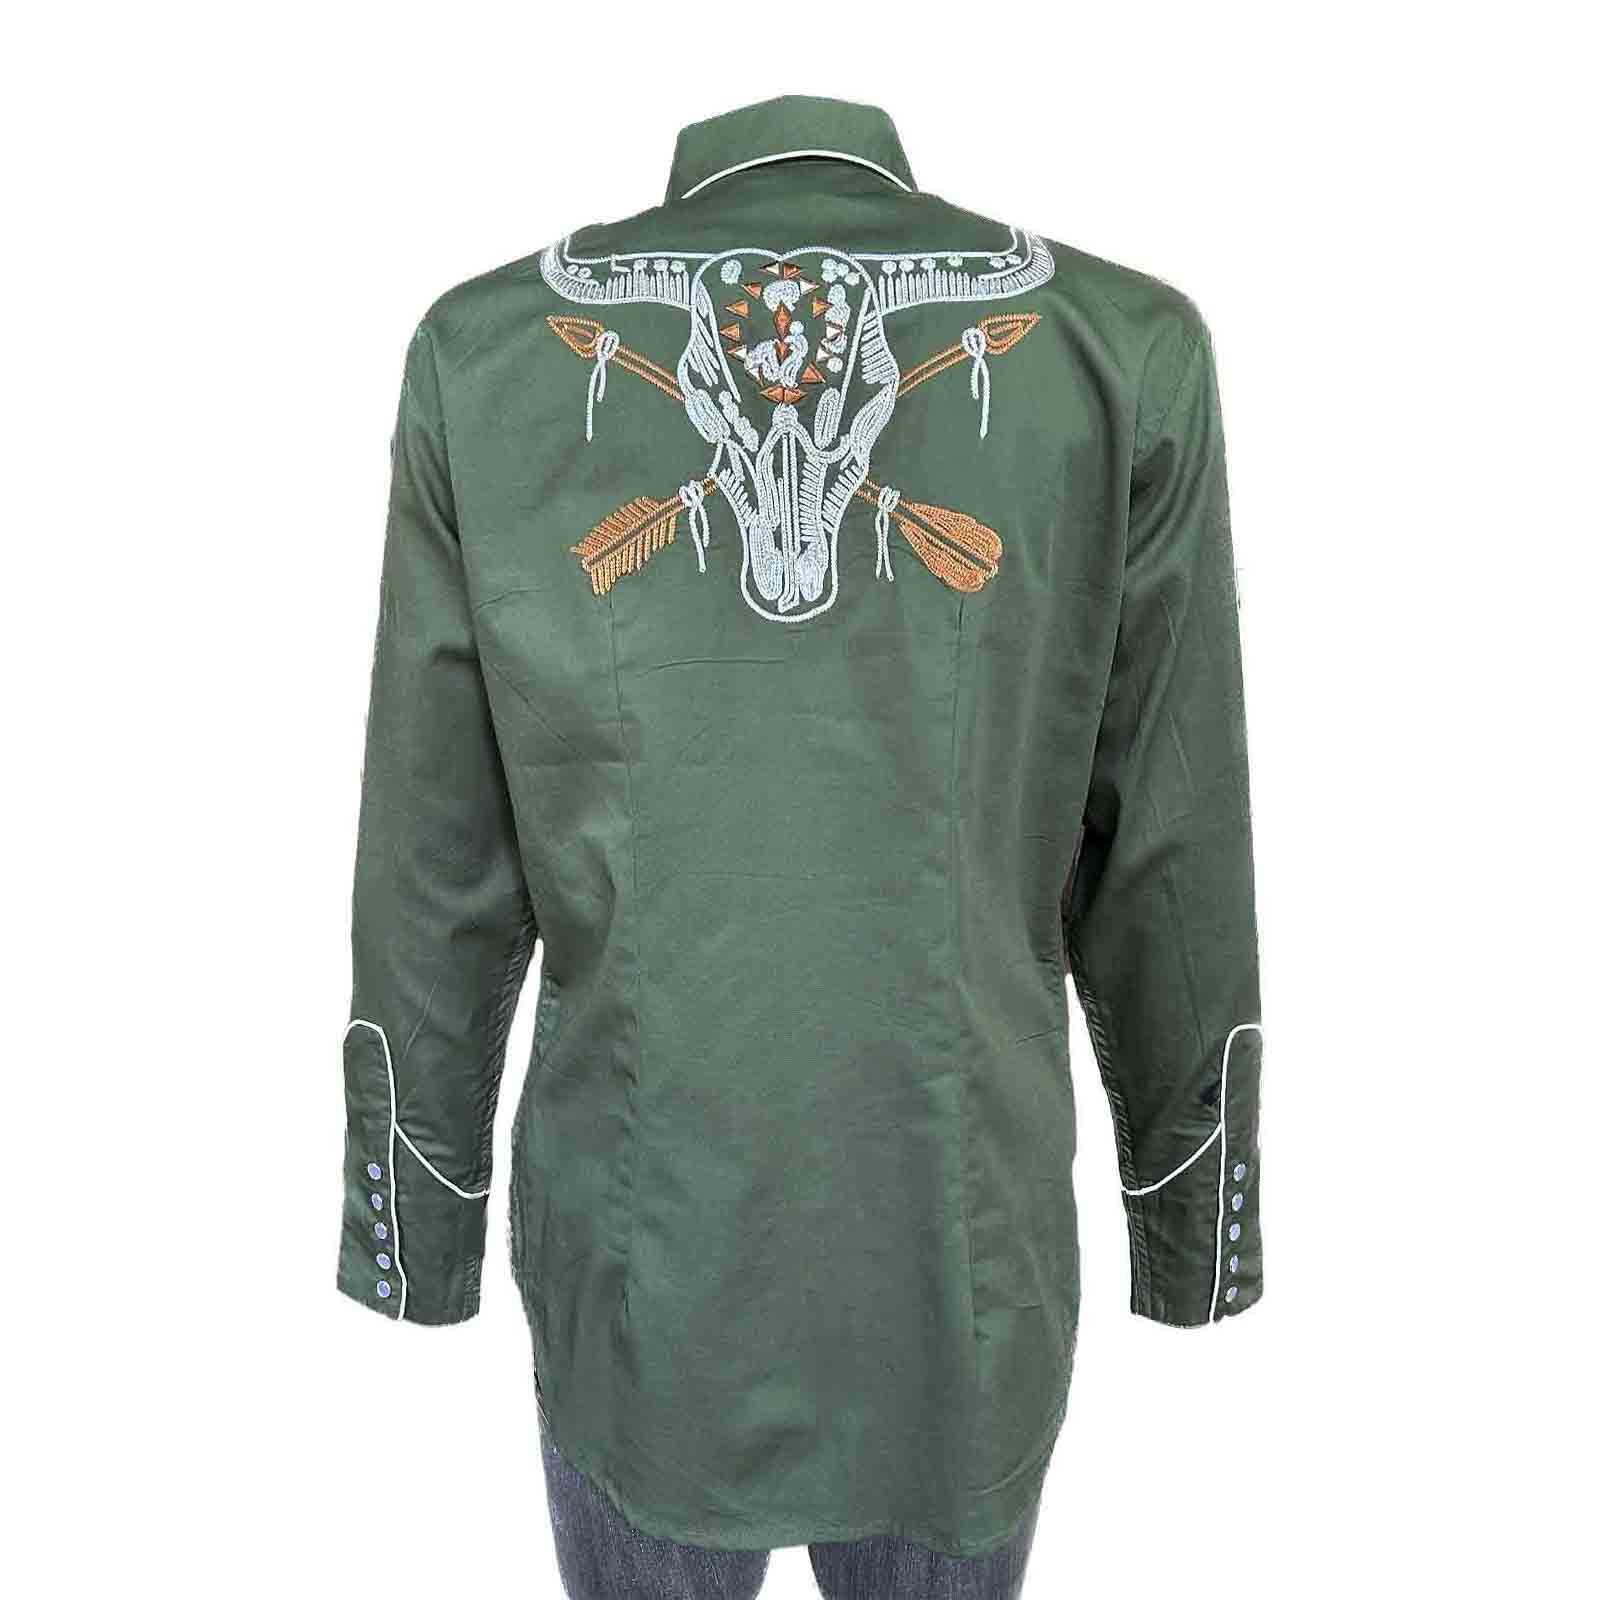 Rockmount Clothing Women’s Vintage Green Steer Skull & Arrow Chain Stitch Embroidery Western Shirt